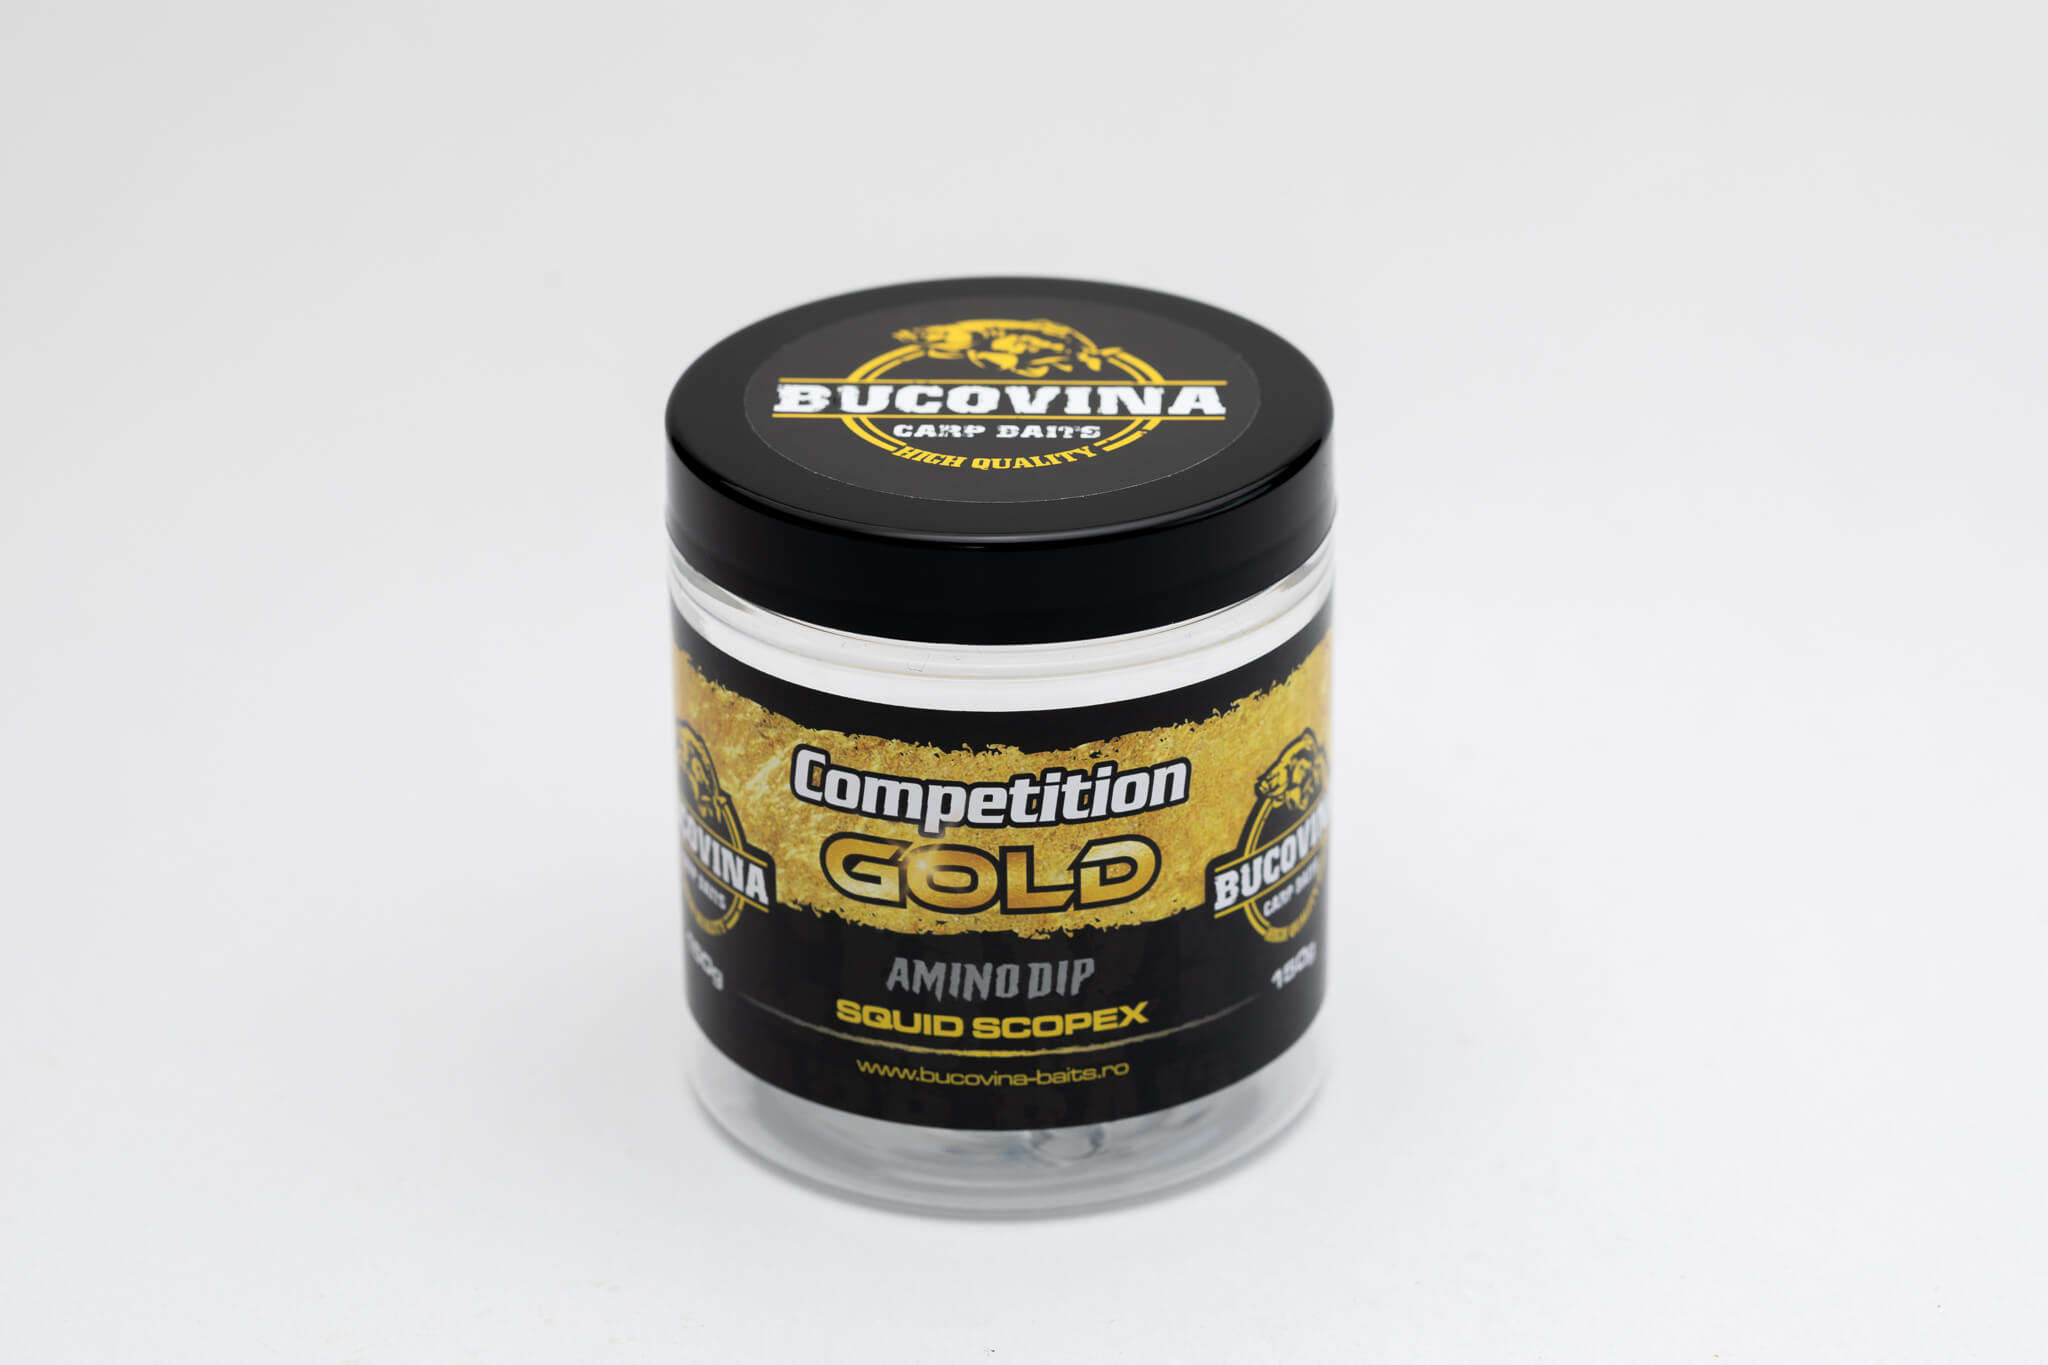 Amino Dip Bucovina Baits Competition Gold 150gr